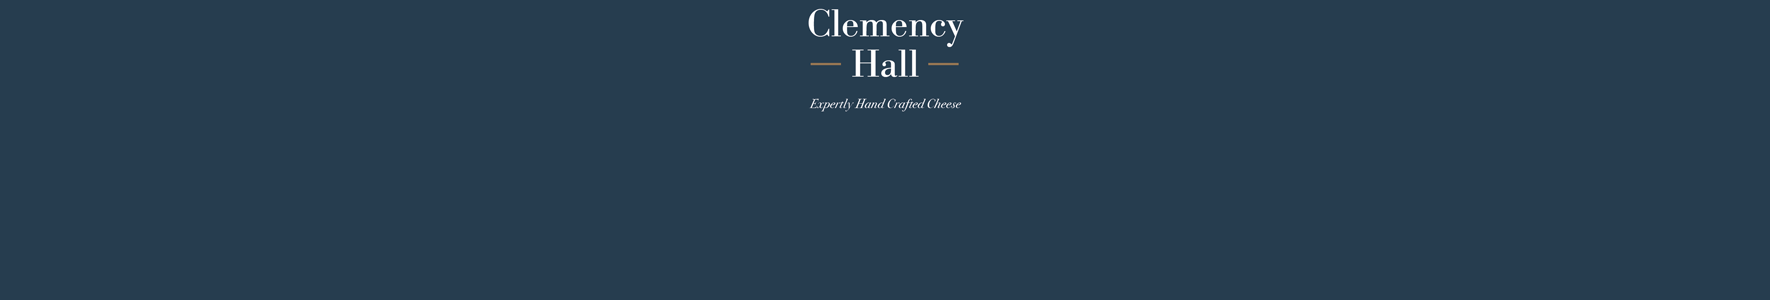 Clemency Hall